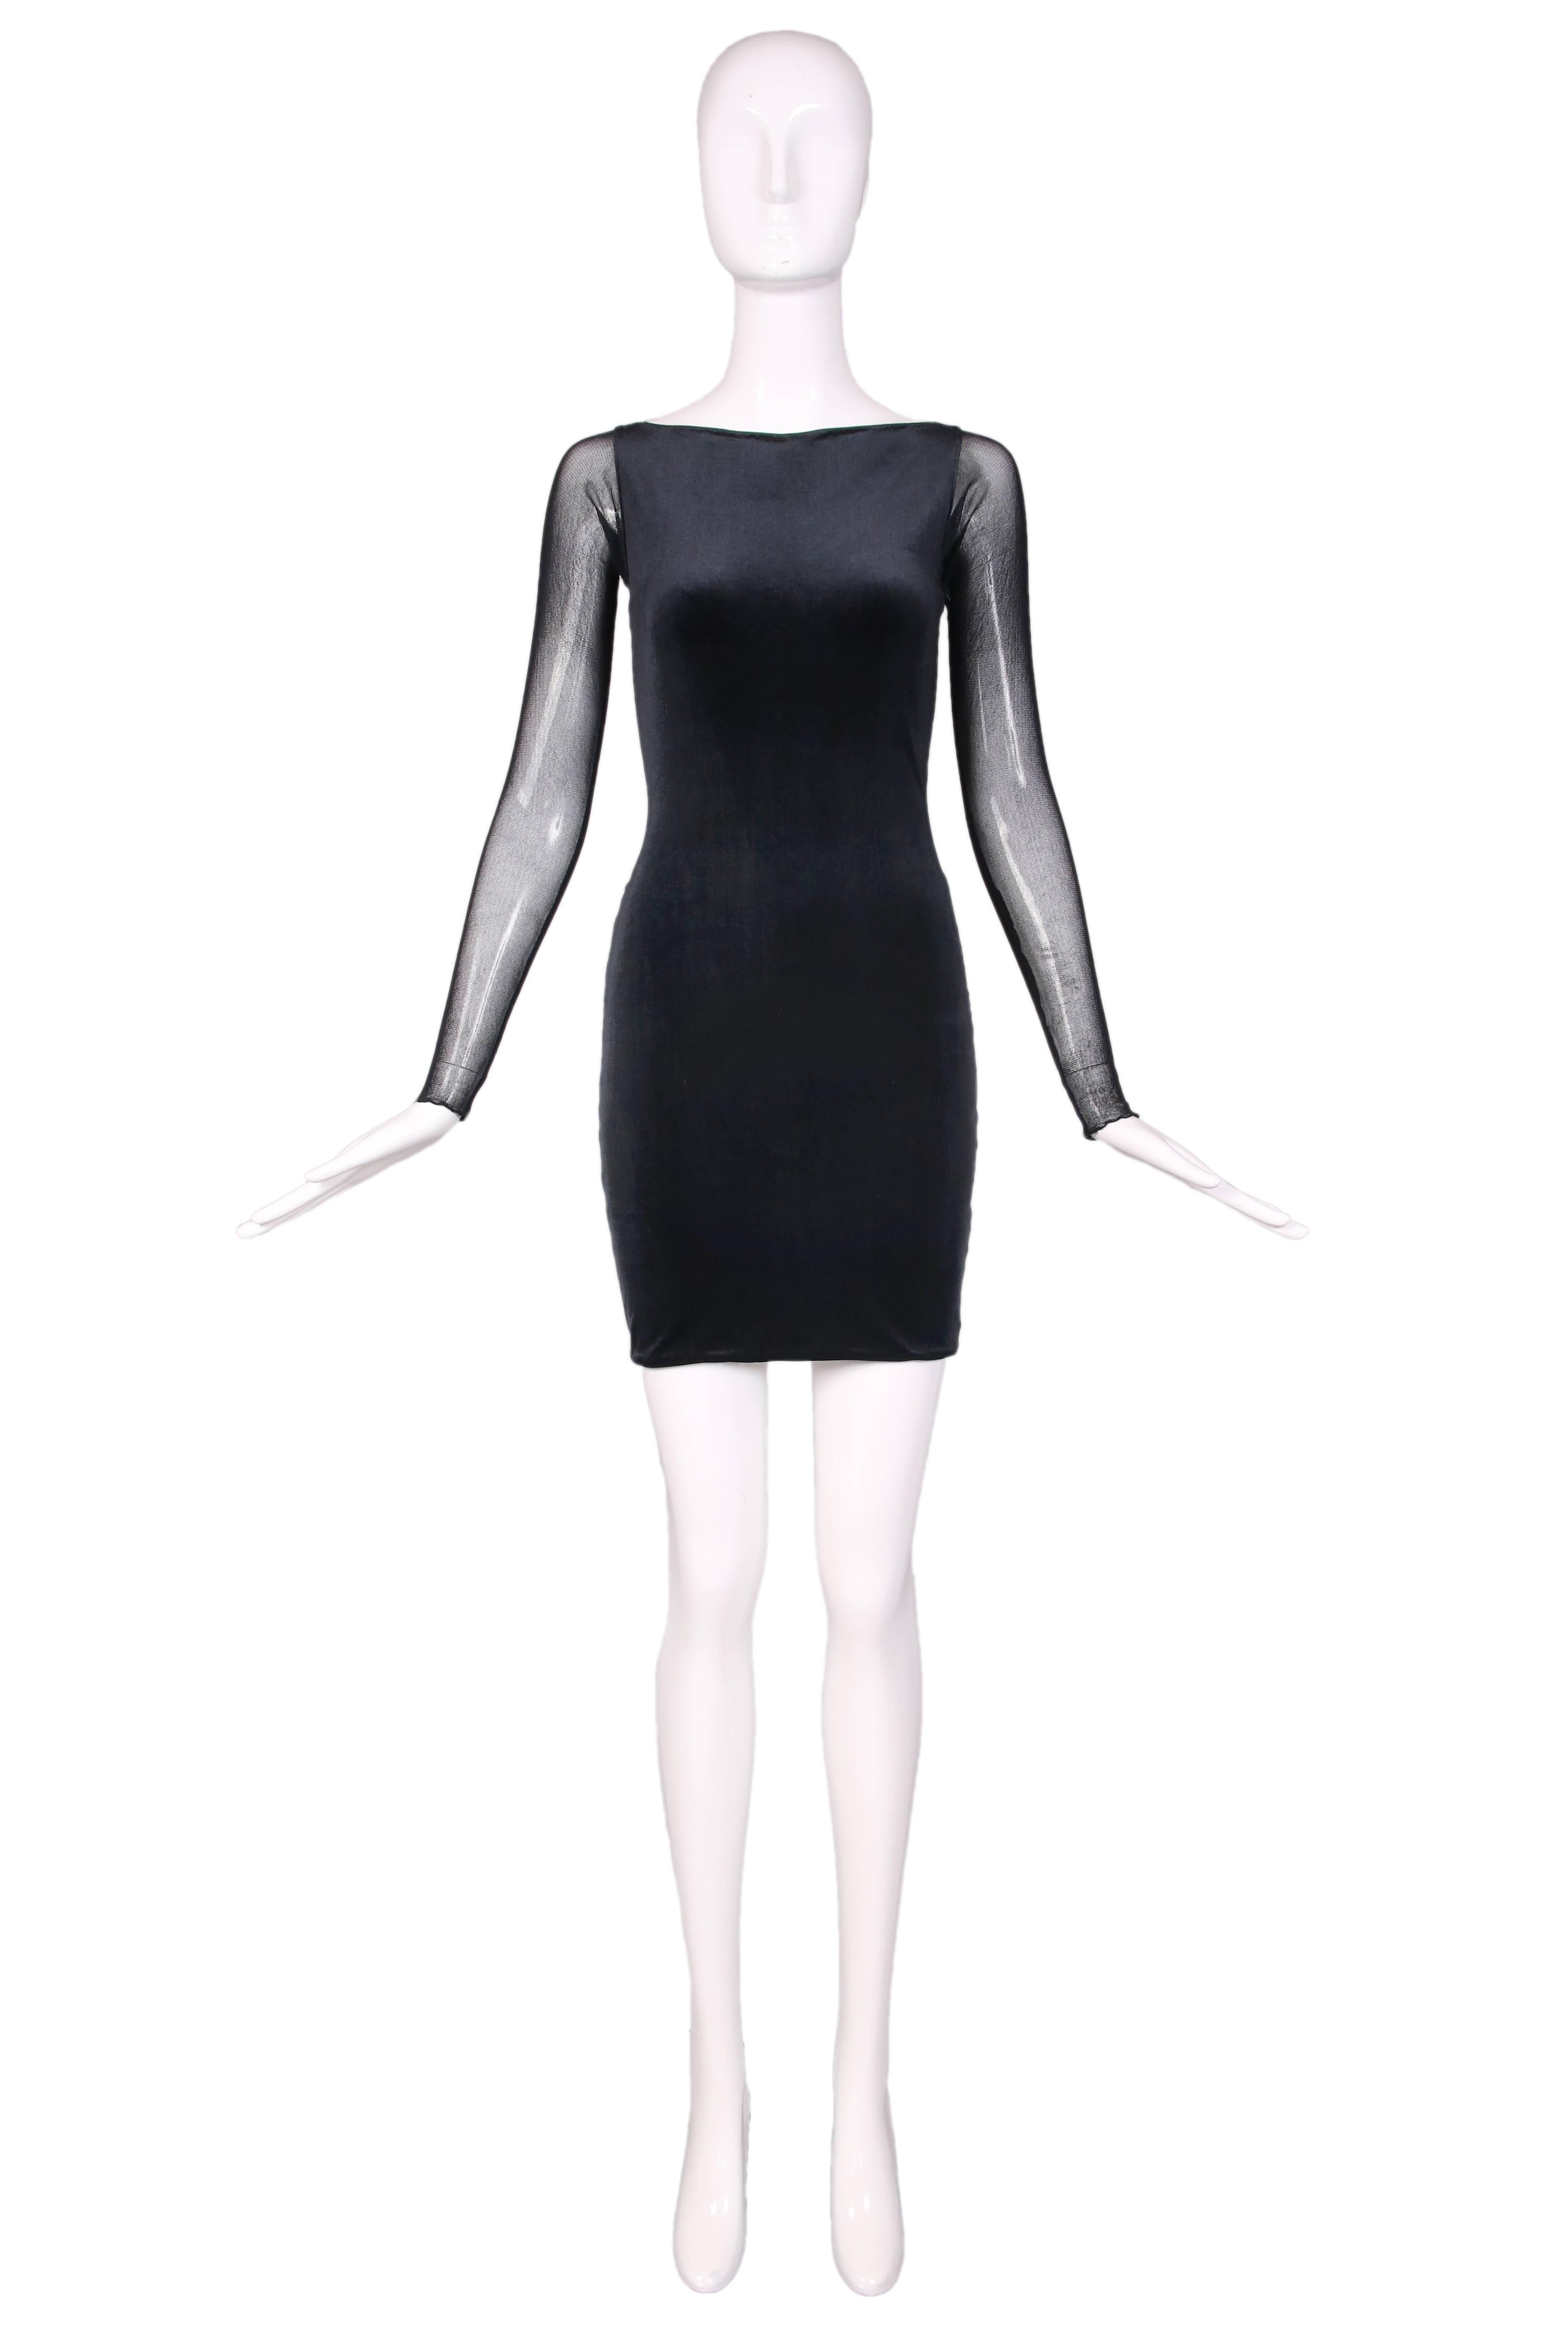 Vintage Giorgio Di Sant Angelo black bodycon dress W/stretch velvet front, illusion sleeves and back. In excellent condition. No size tag, please consult measurements.
MEASUREMENTS:
Bust - 30